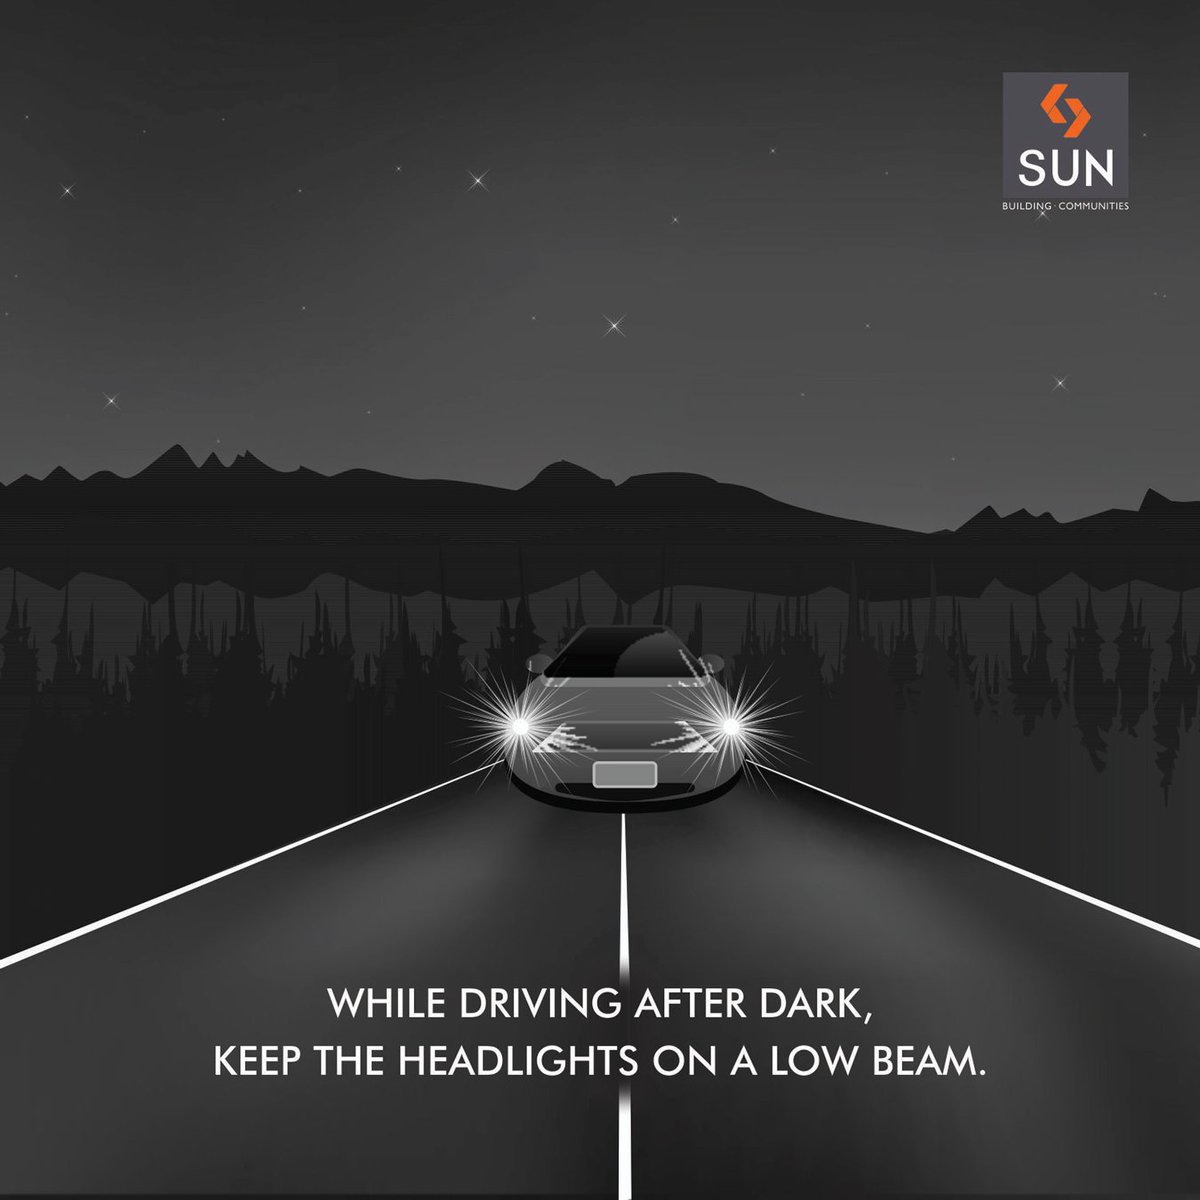 High beams are to be used only in multi-laned highways or on highways with no street lights,without blinding others. https://t.co/uIixA4wMMZ